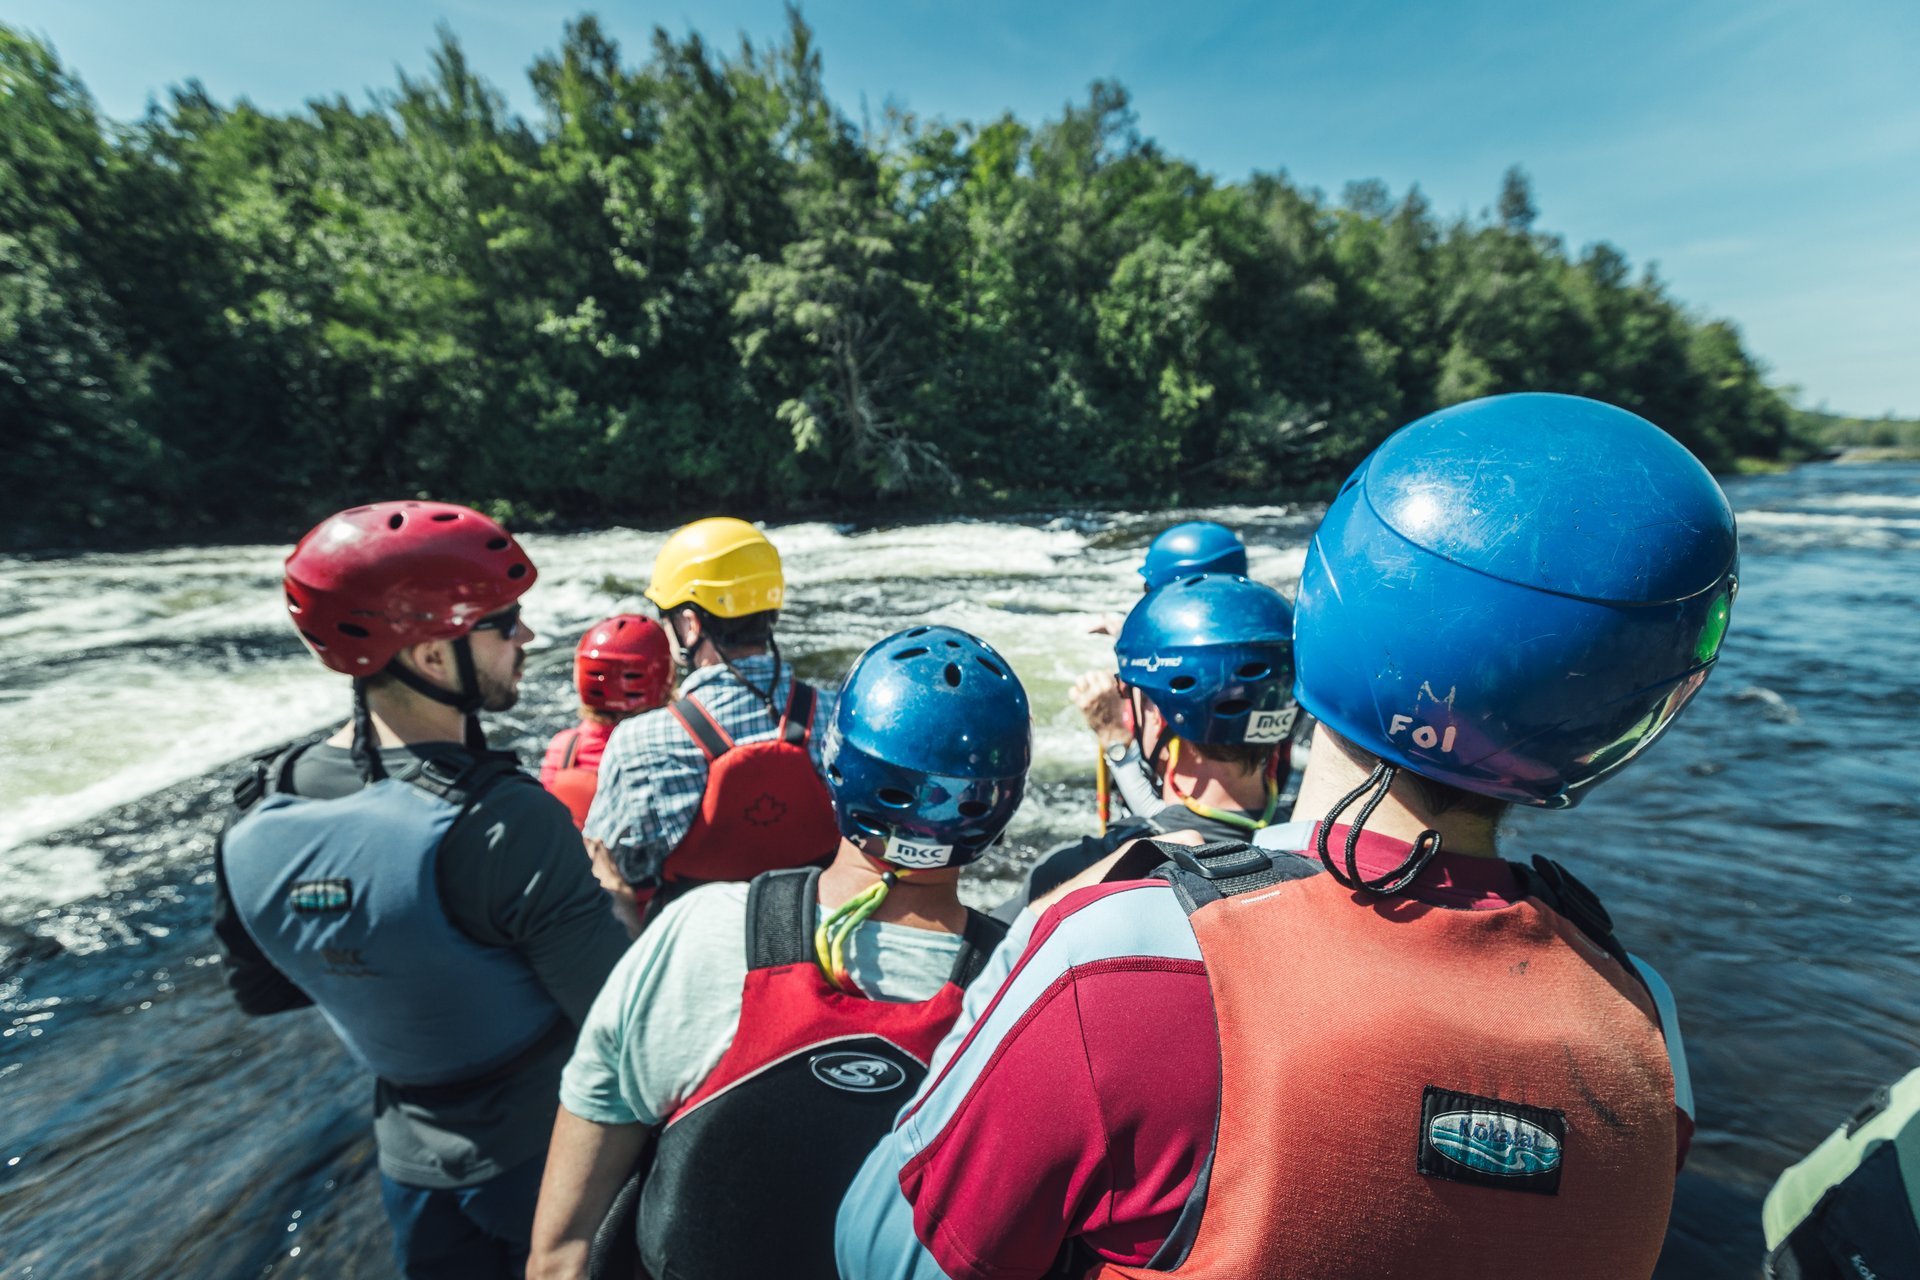 people participate in a whitewater paddling course on the Madawaska River